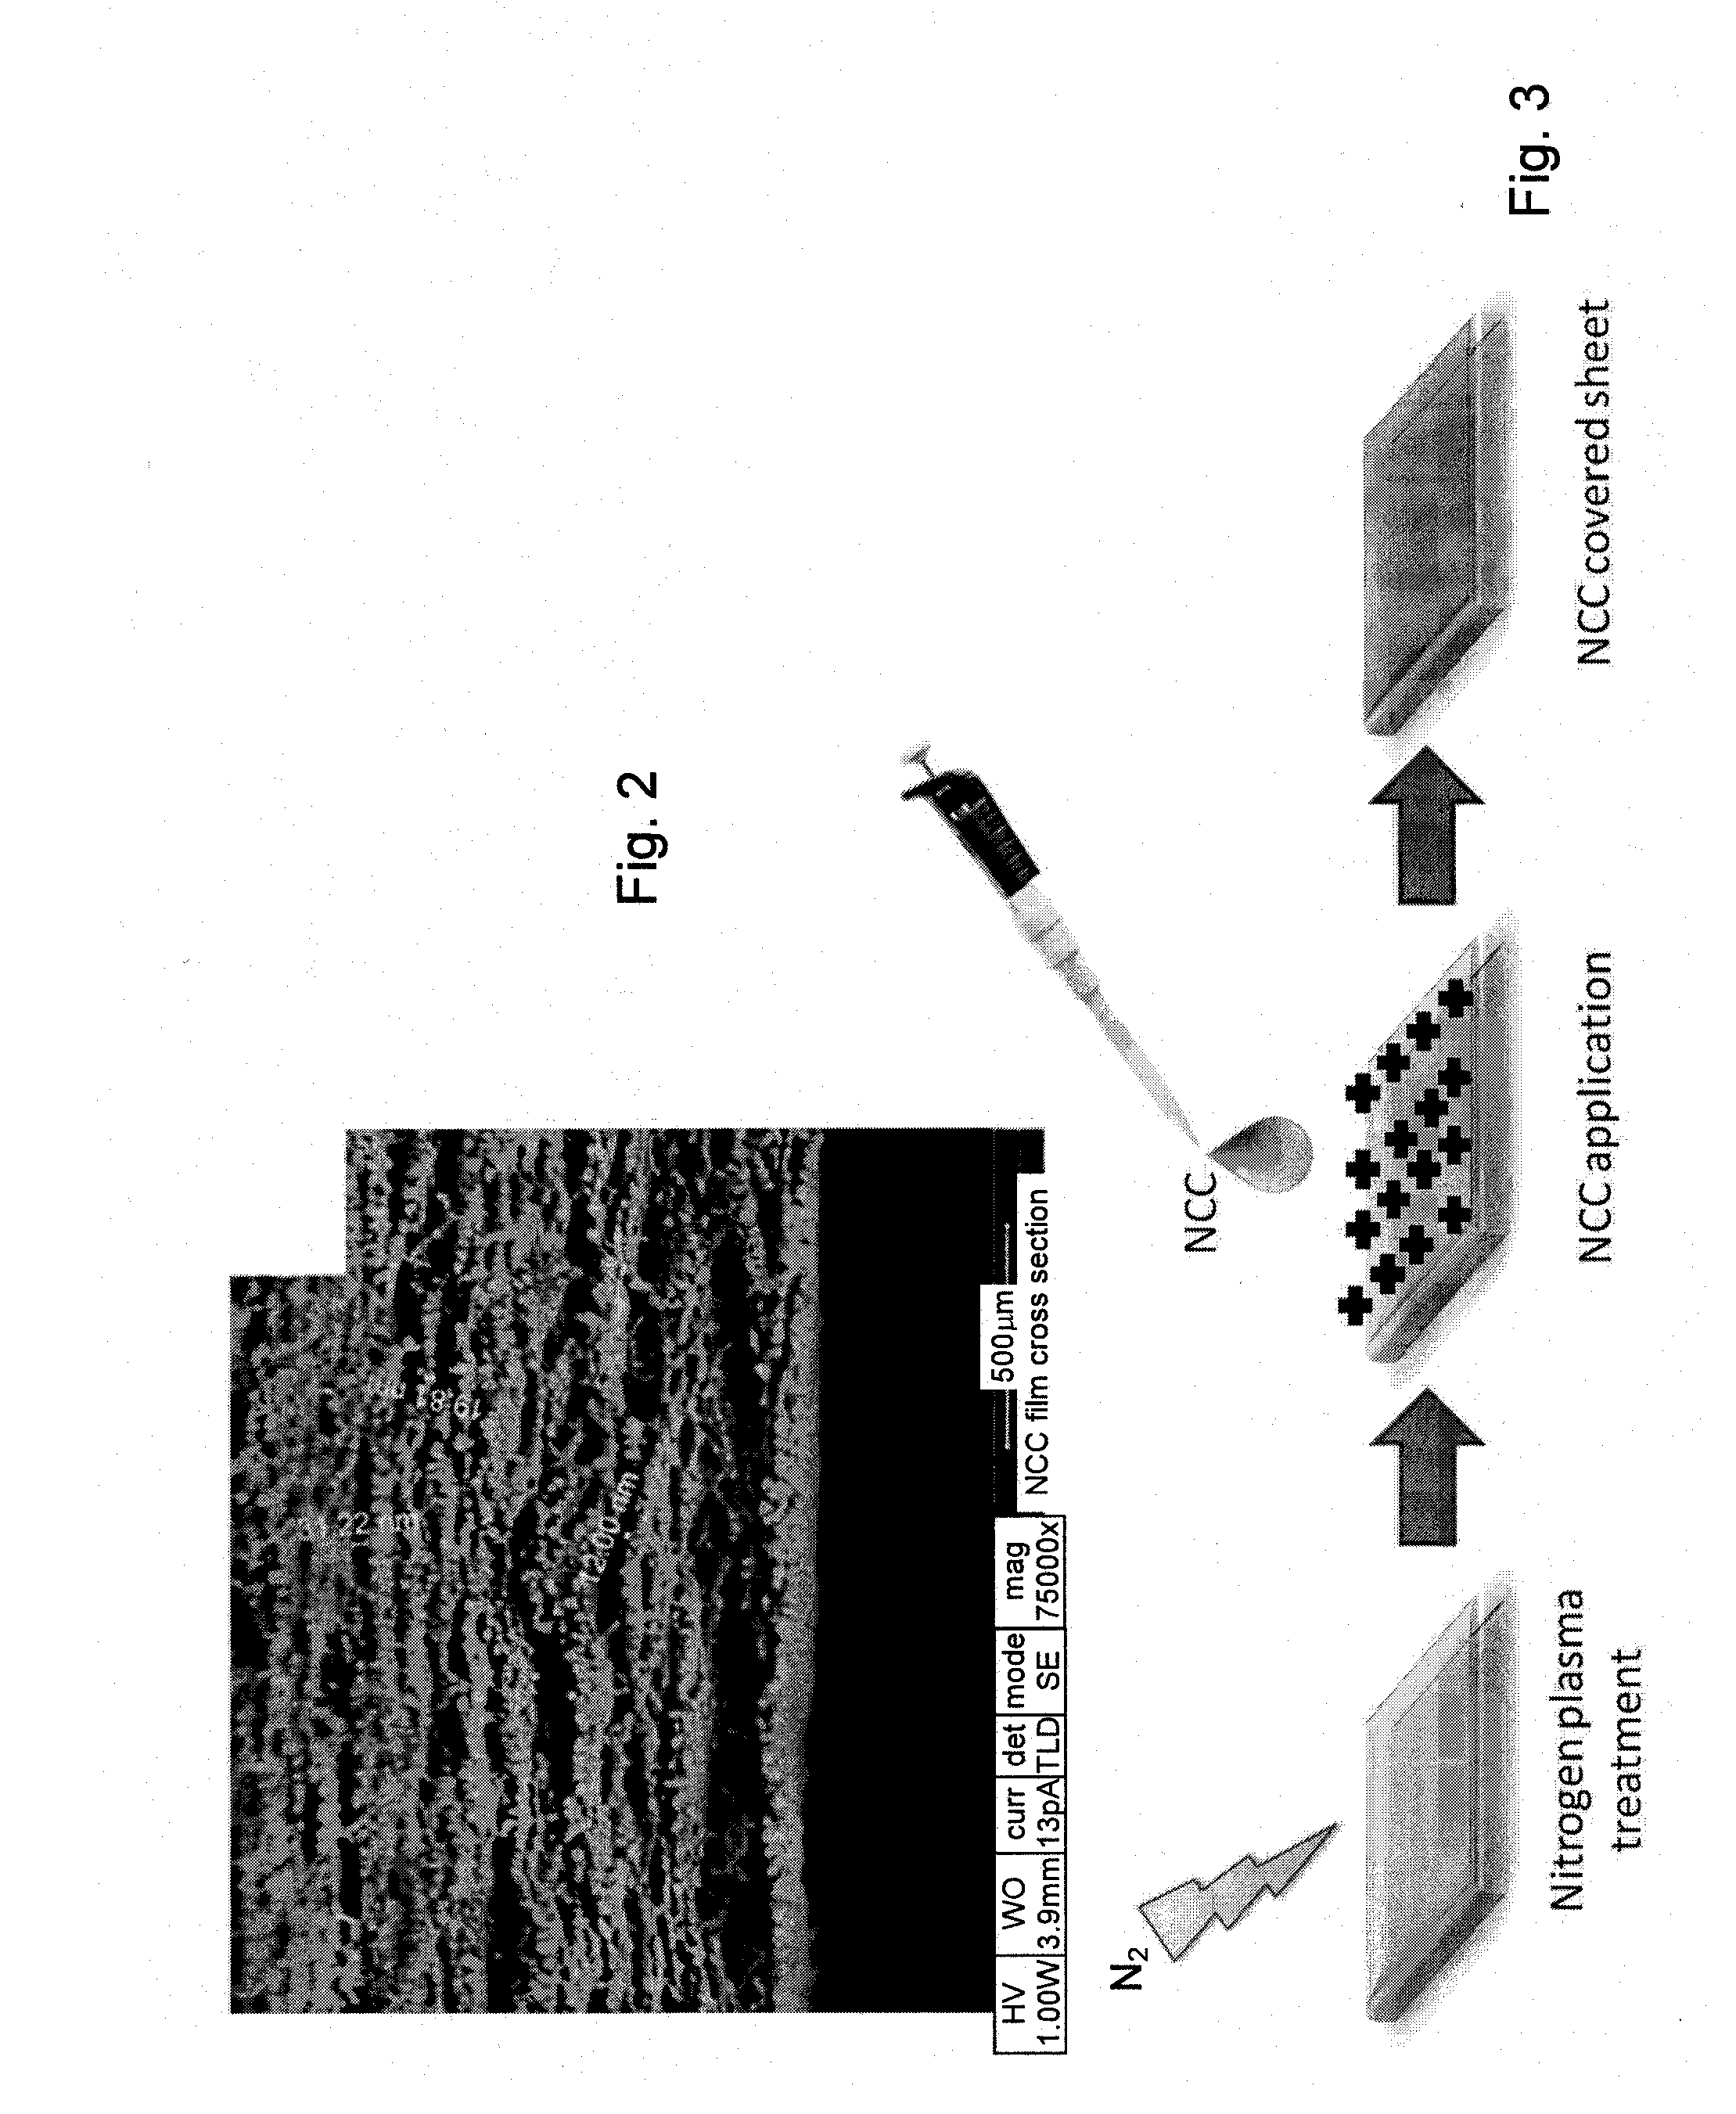 Coating layers of a nanocomposite comprising a nano-cellulose material and nanoparticles